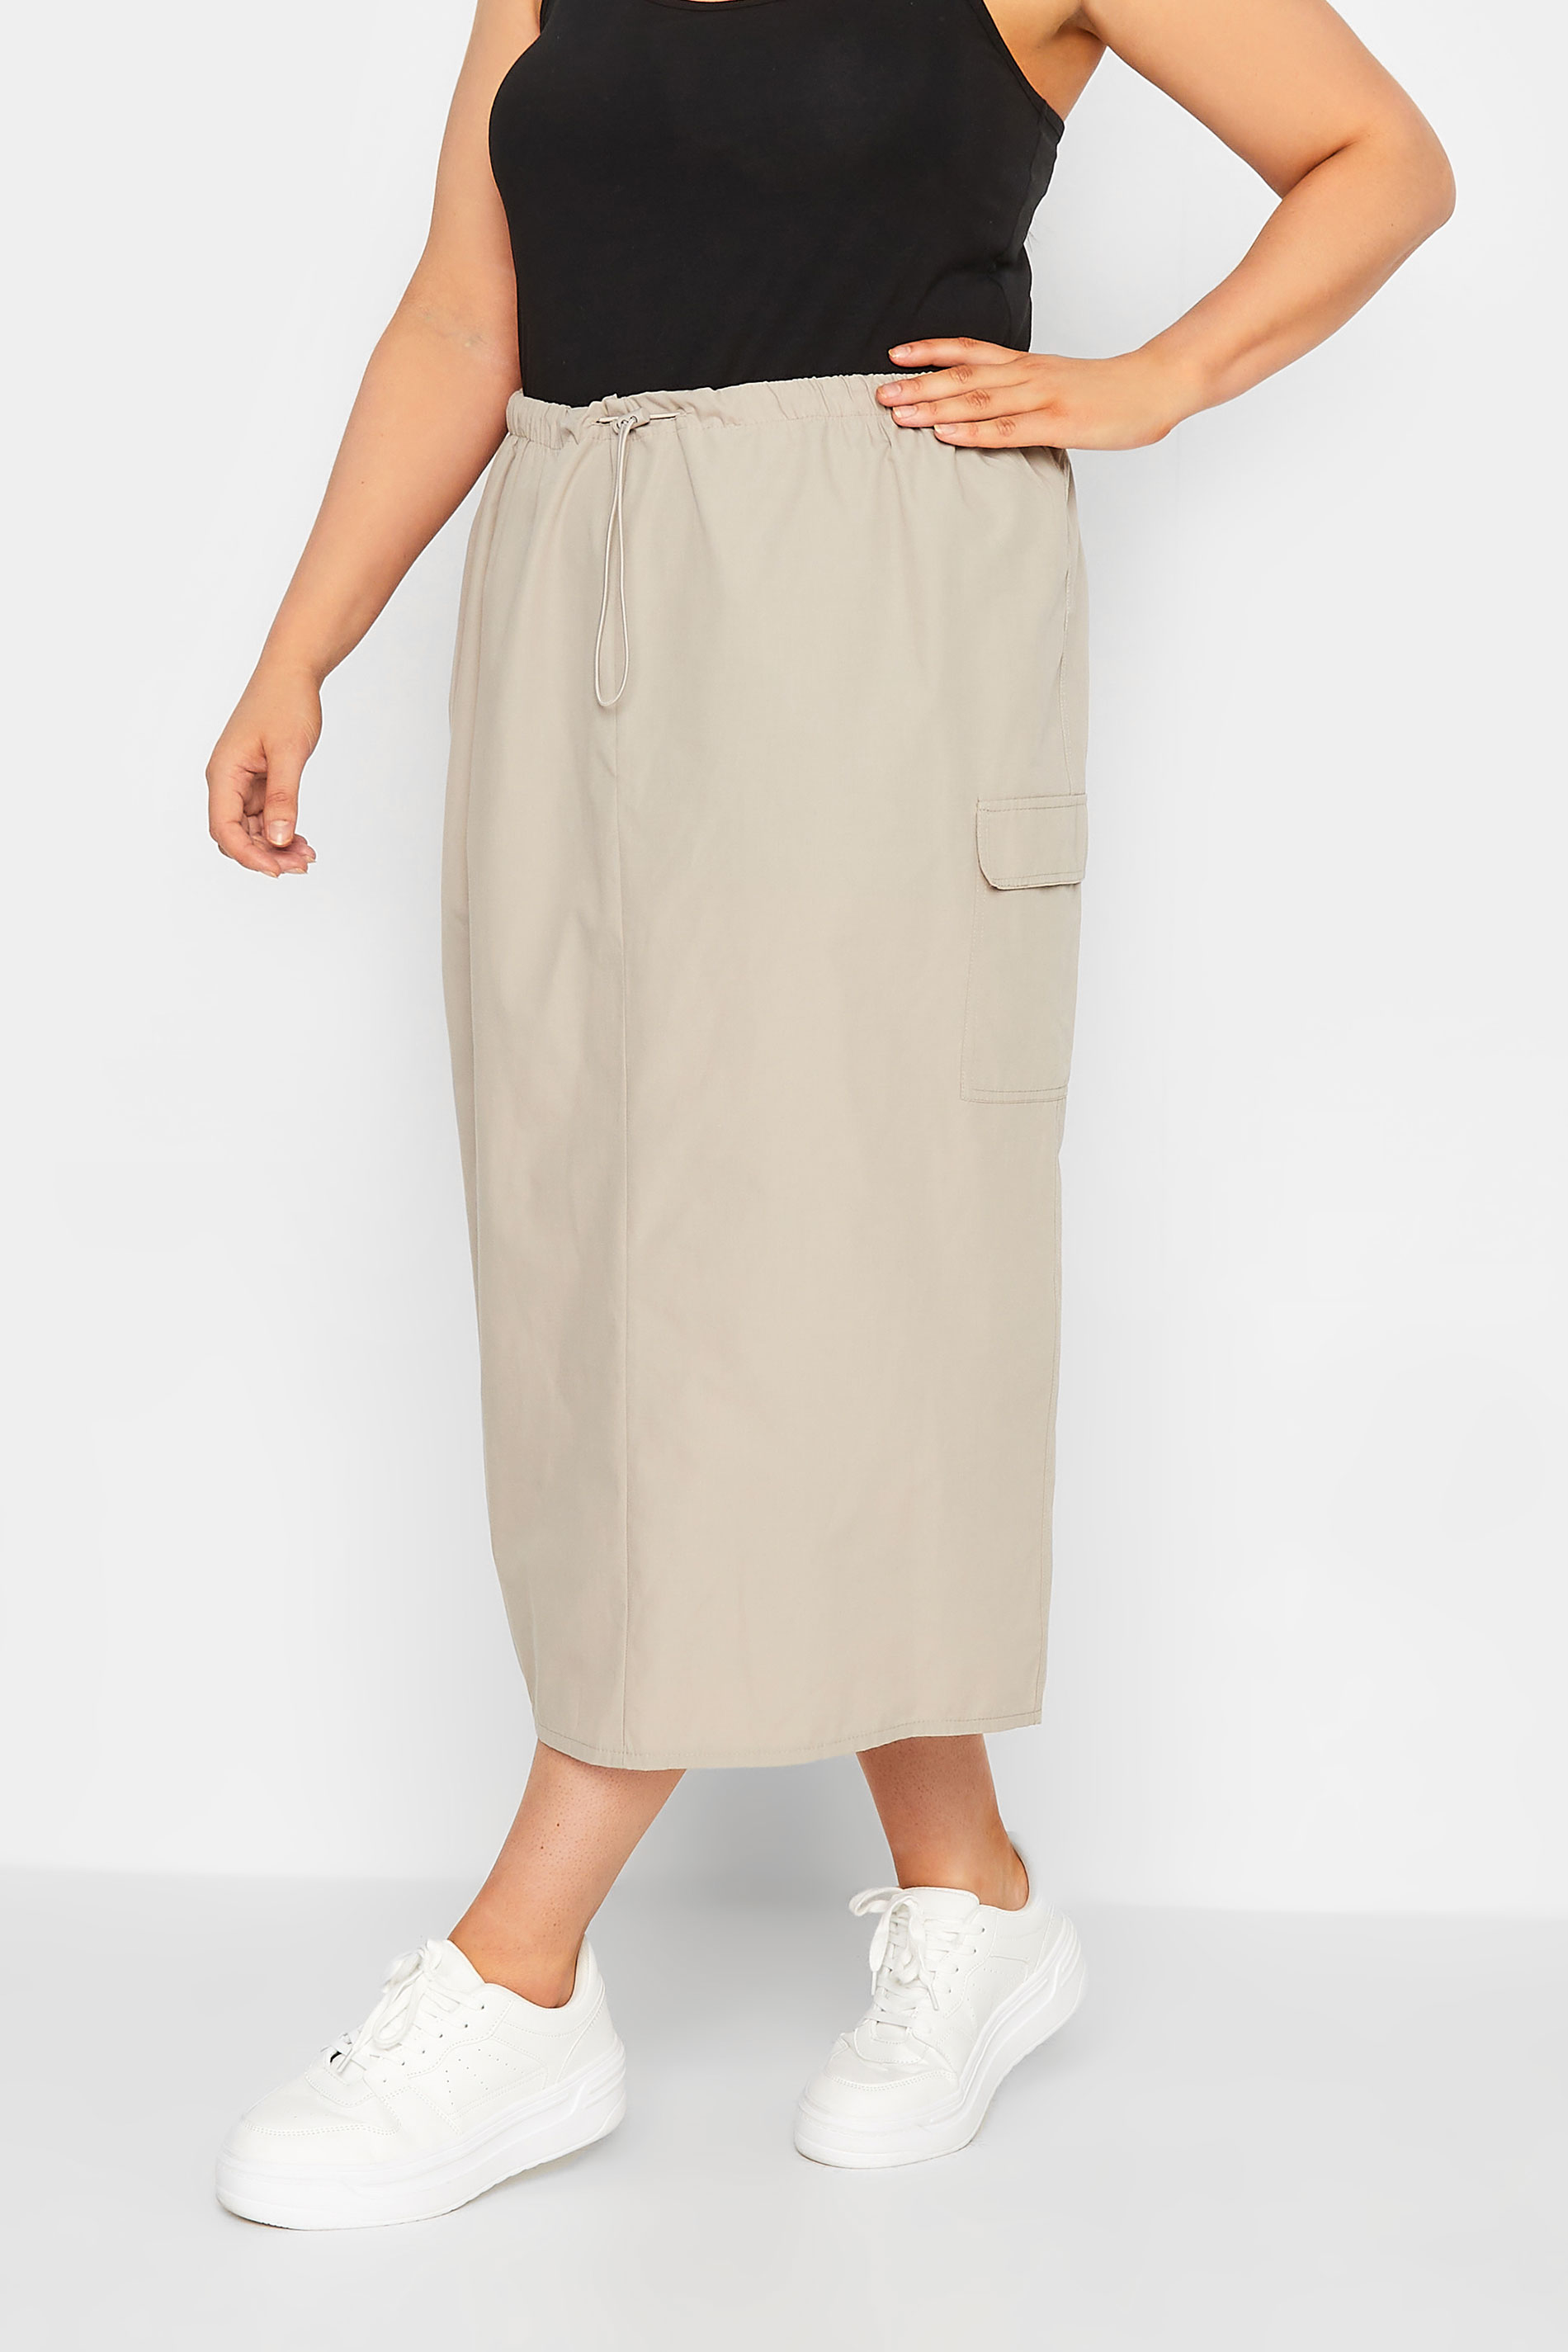 YOURS Plus Size Curve Beige Brown Cargo Skirt | Yours Clothing